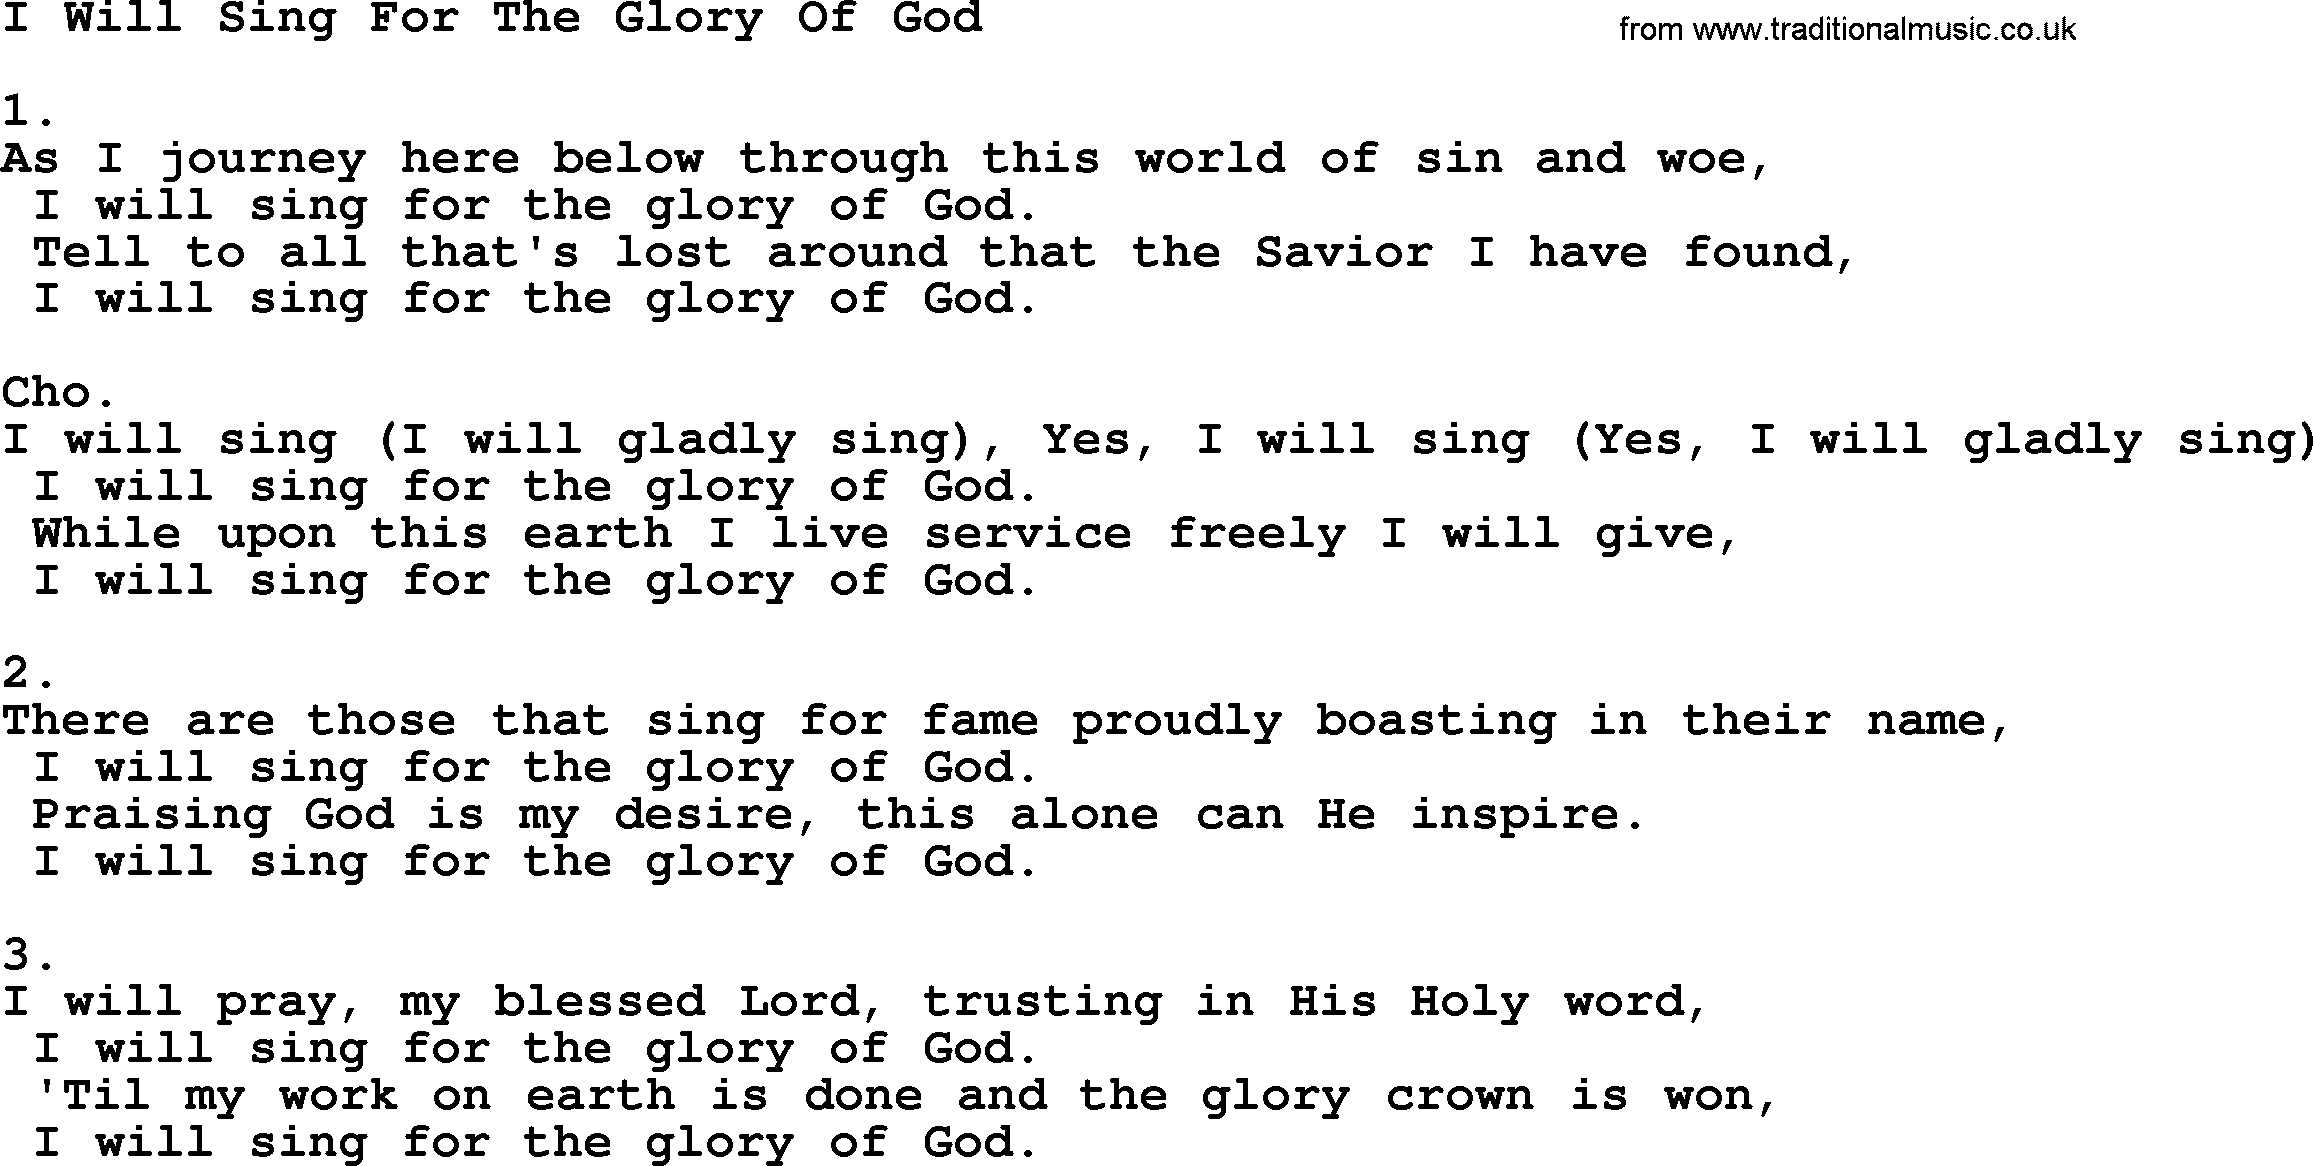 Apostolic & Pentecostal Hymns and Songs, Hymn: I Will Sing For The Glory Of God lyrics and PDF